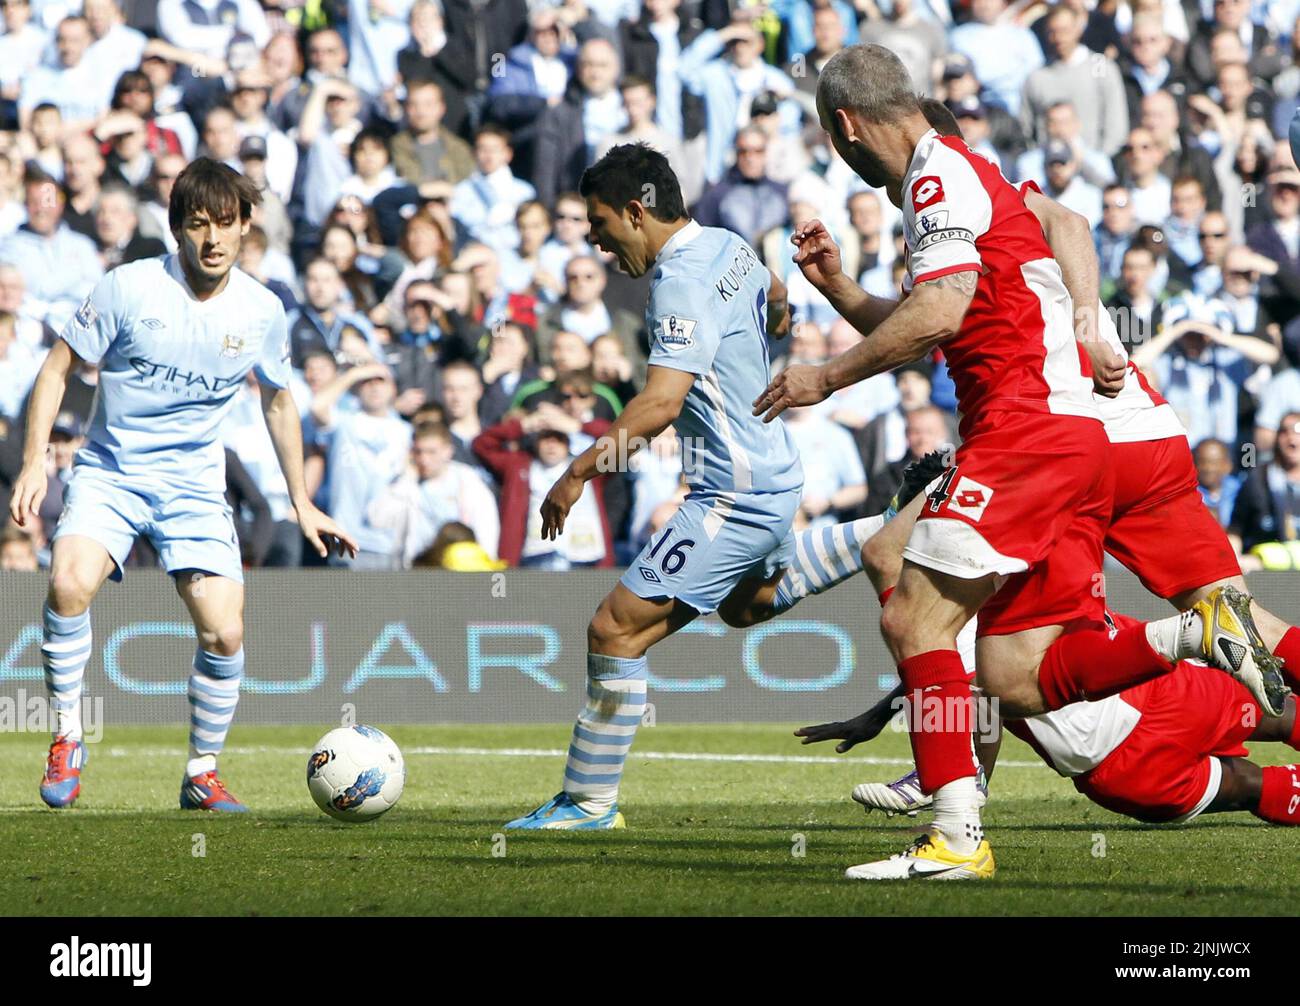 File photo dated 13-05-2012 of Manchester City's Sergio Aguero. Time was ticking on Manchester City's title dream with QPR offering brave resistance at the Etihad Stadium. The ball fell to the right foot of Sergio Aguero in the fifth added minute. Cue delirium inside the stadium as Sky commentator Martin Tyler producing his 'Aguerooooo' line to a gob-smacked TV audience. Issue date: Friday August 12, 2022. Stock Photo